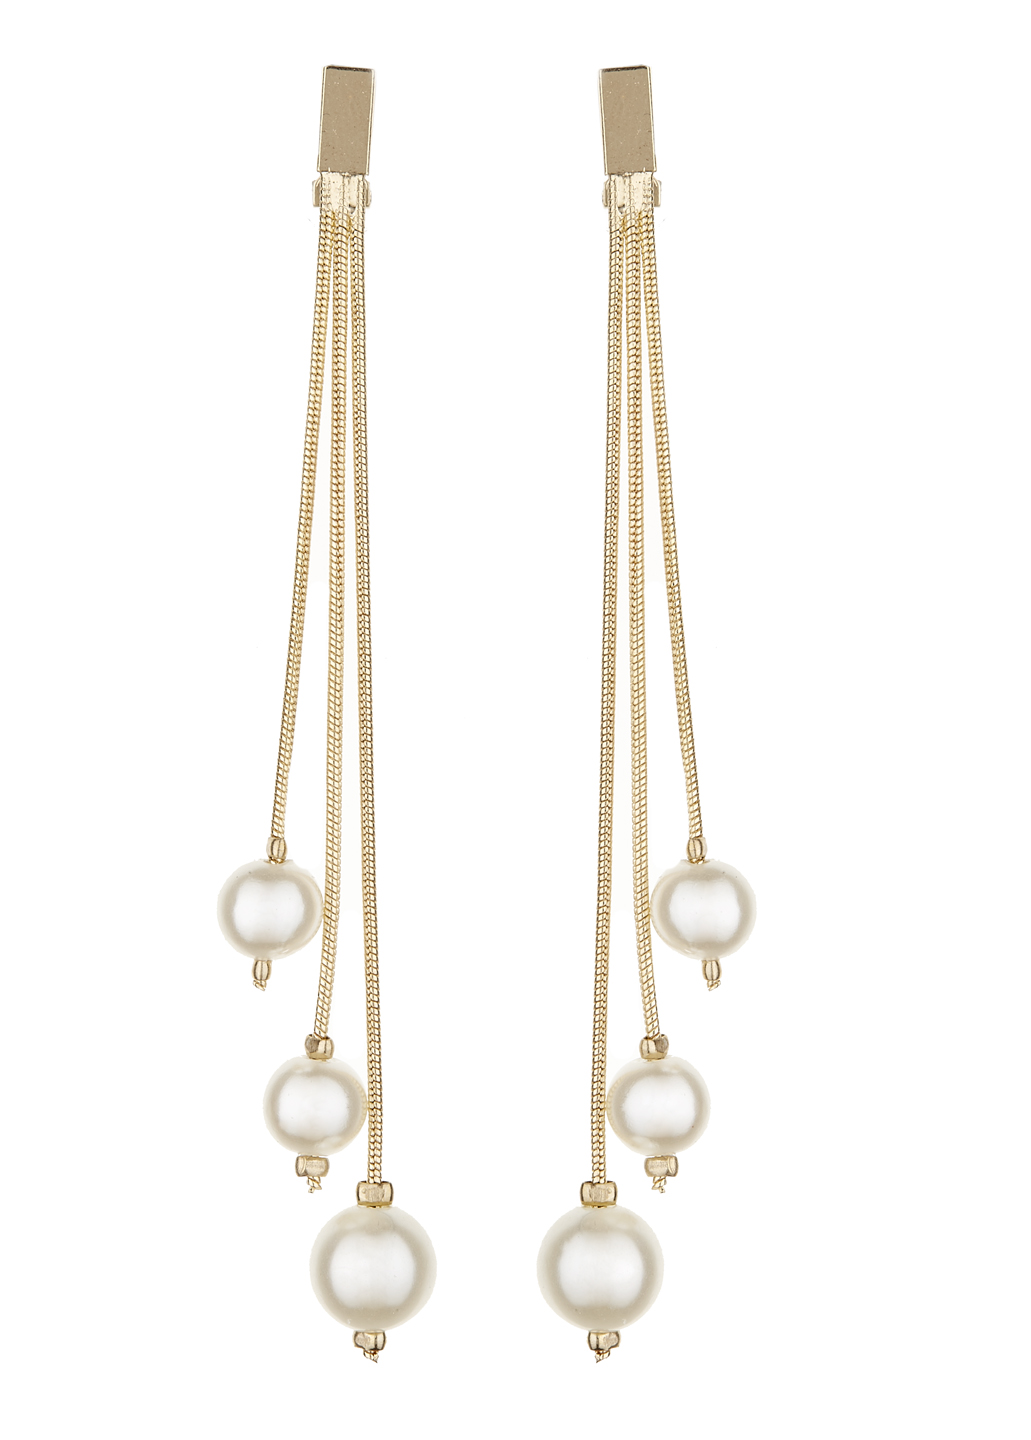 Clip On Earrings - Kalinda - gold drop earring with three pearls